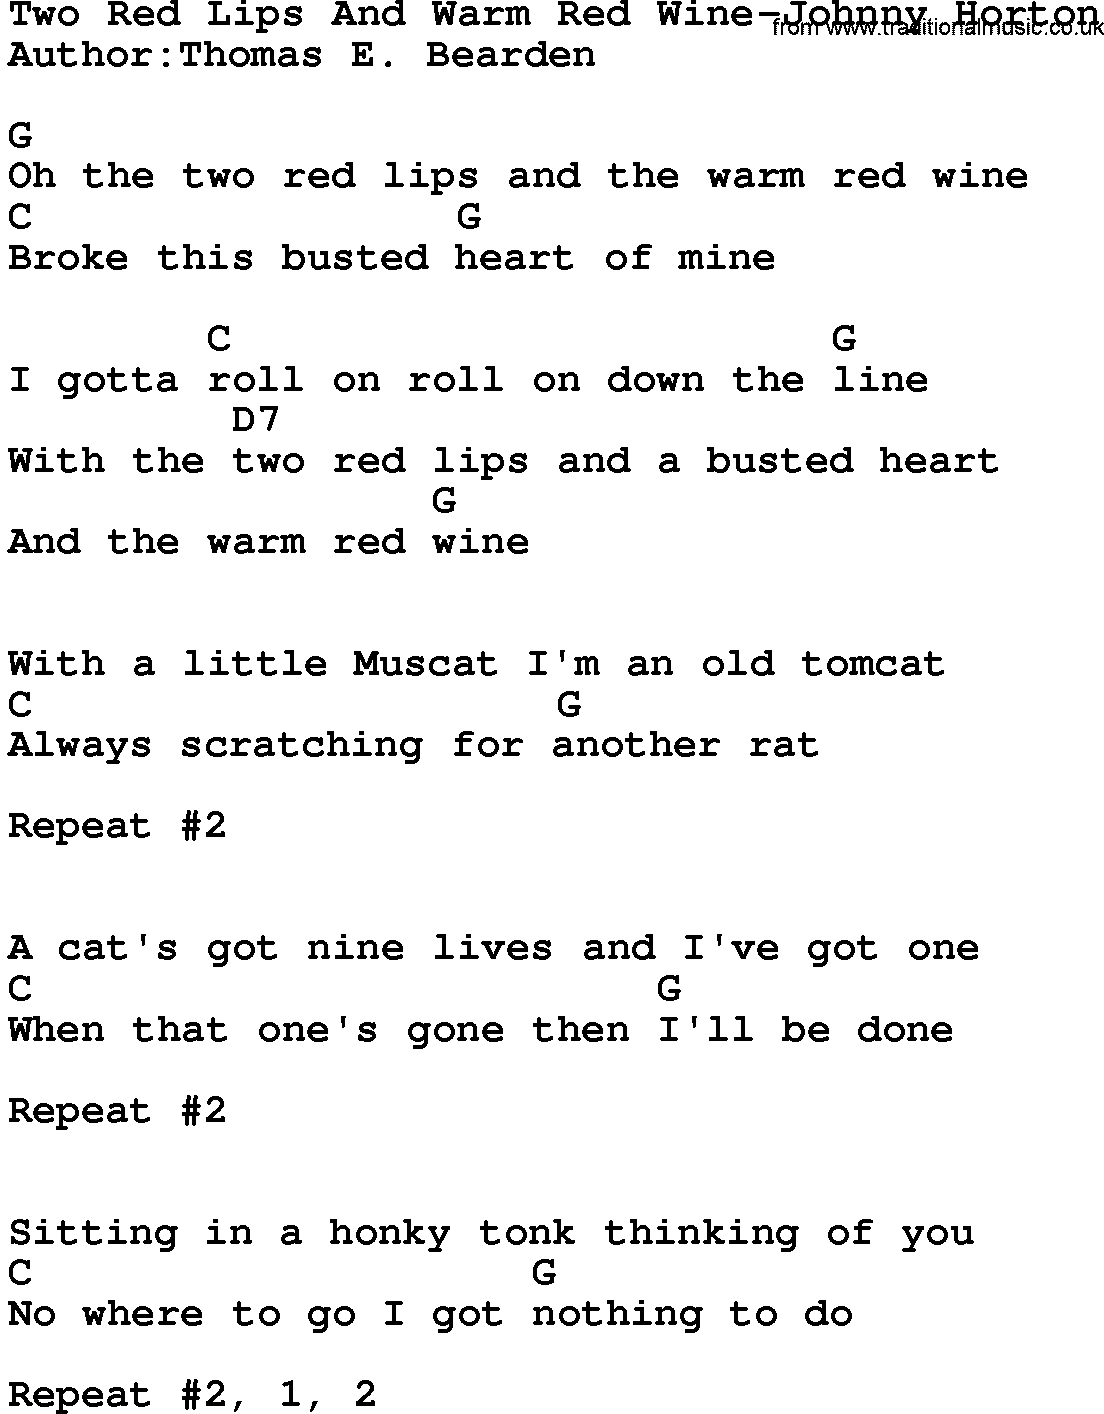 Country music song: Two Red Lips And Warm Red Wine-Johnny Horton lyrics and chords